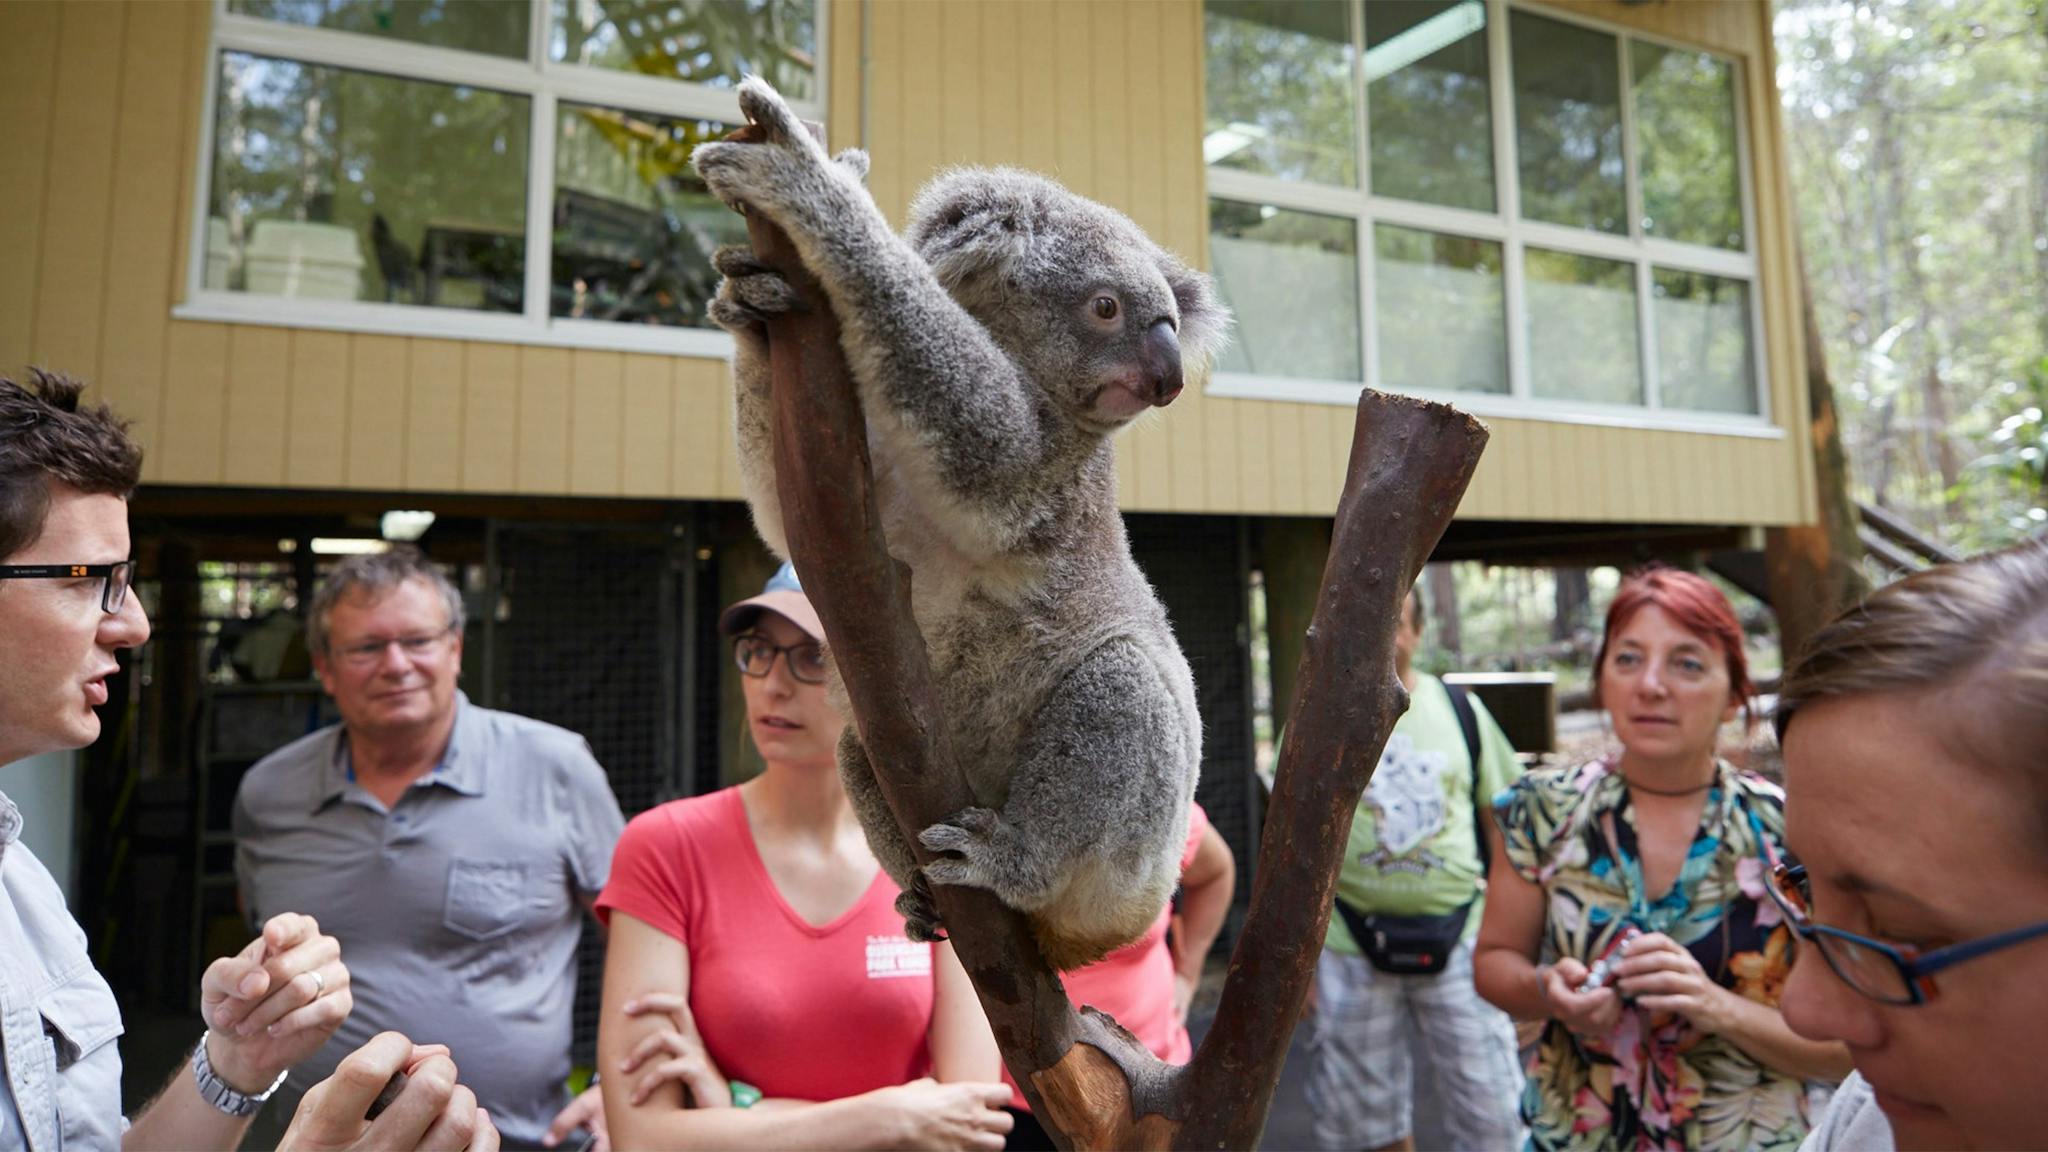 People standing around a koala on a low branch with building in background.